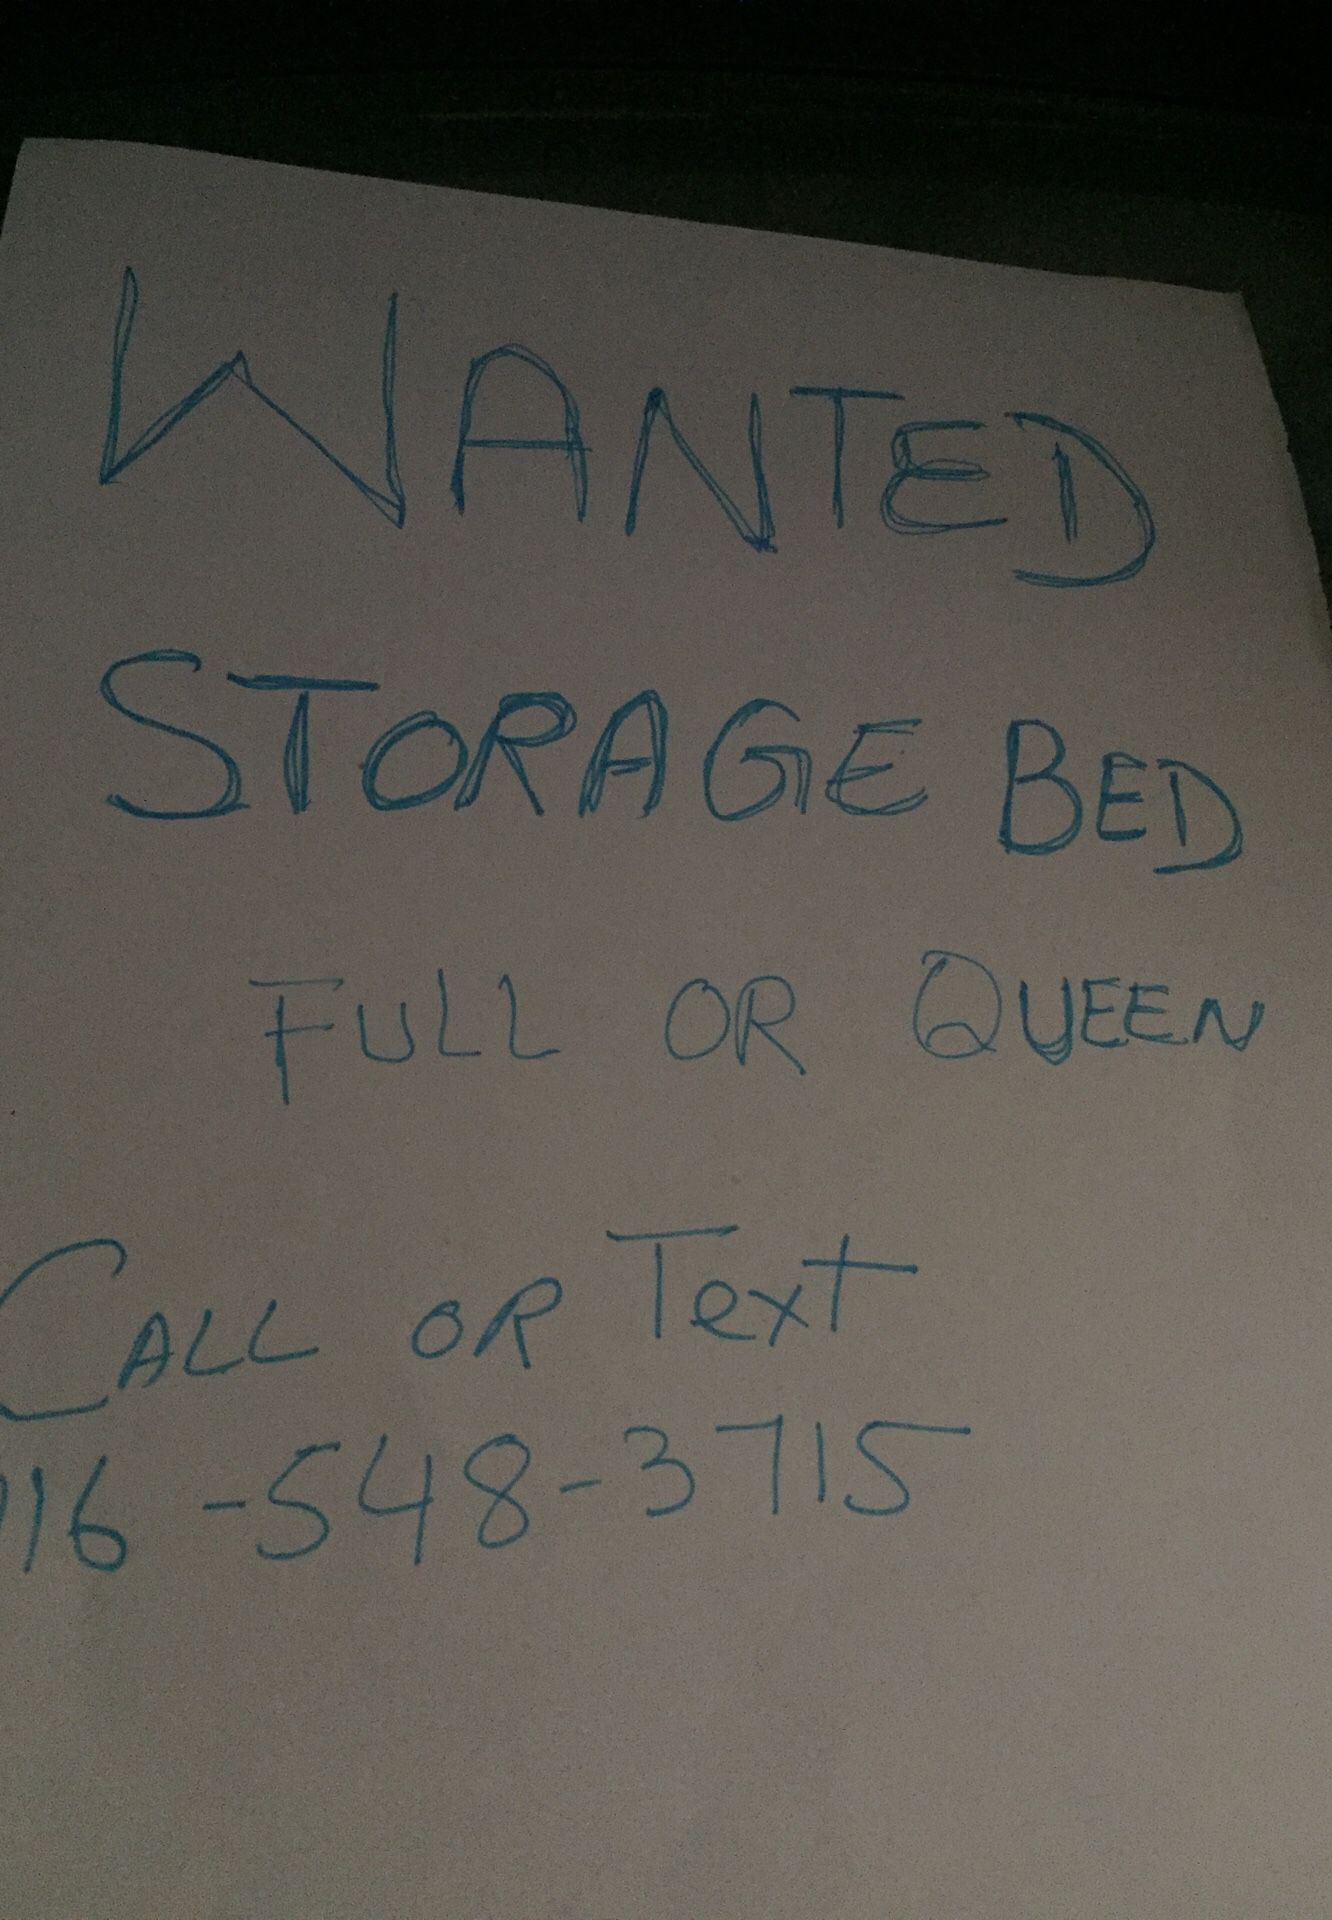 Wanted storage bed full or queen